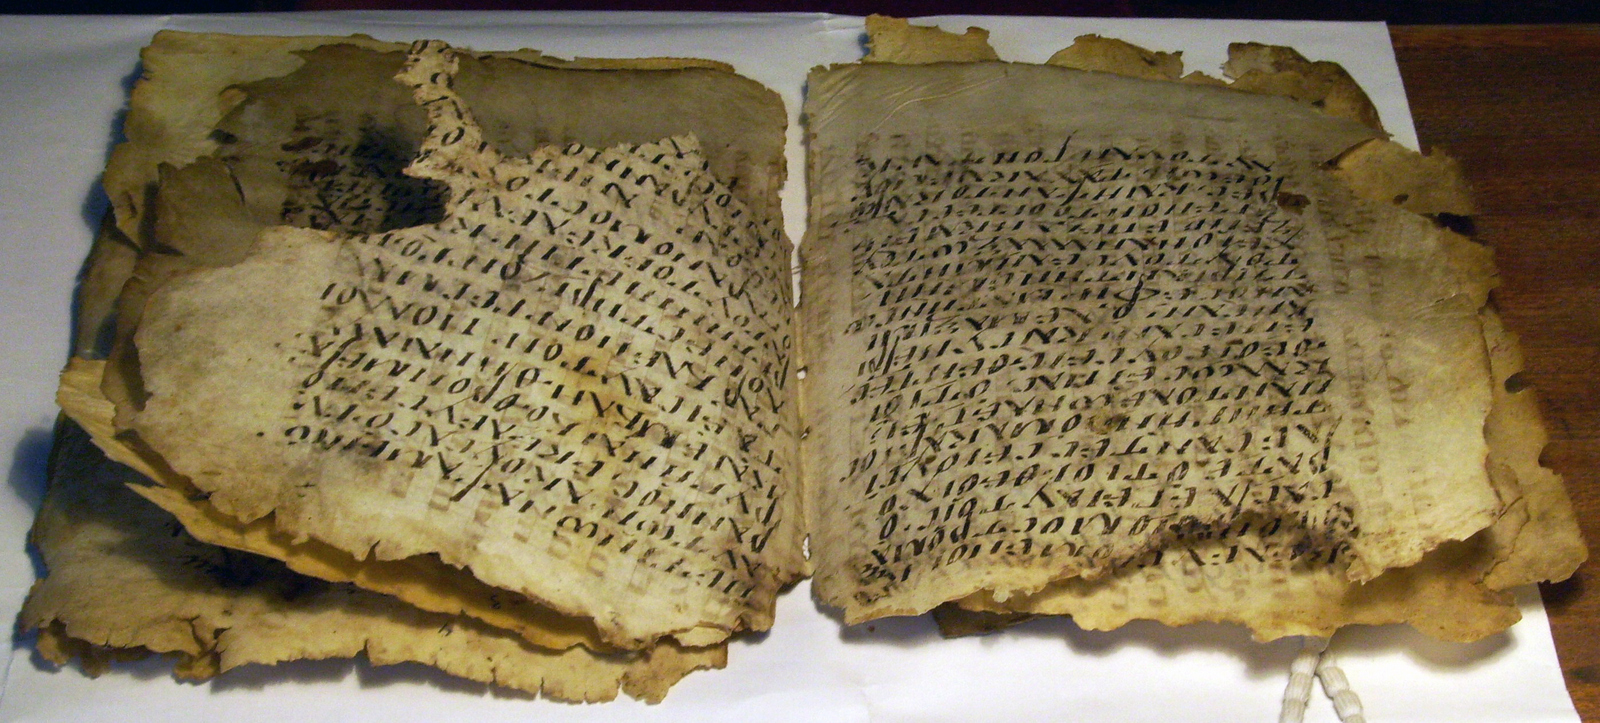 Greek NF MG 32, a palimpsest manuscript from the New Finds, St. Catherine's Monastery of the Sinai, Egypt.